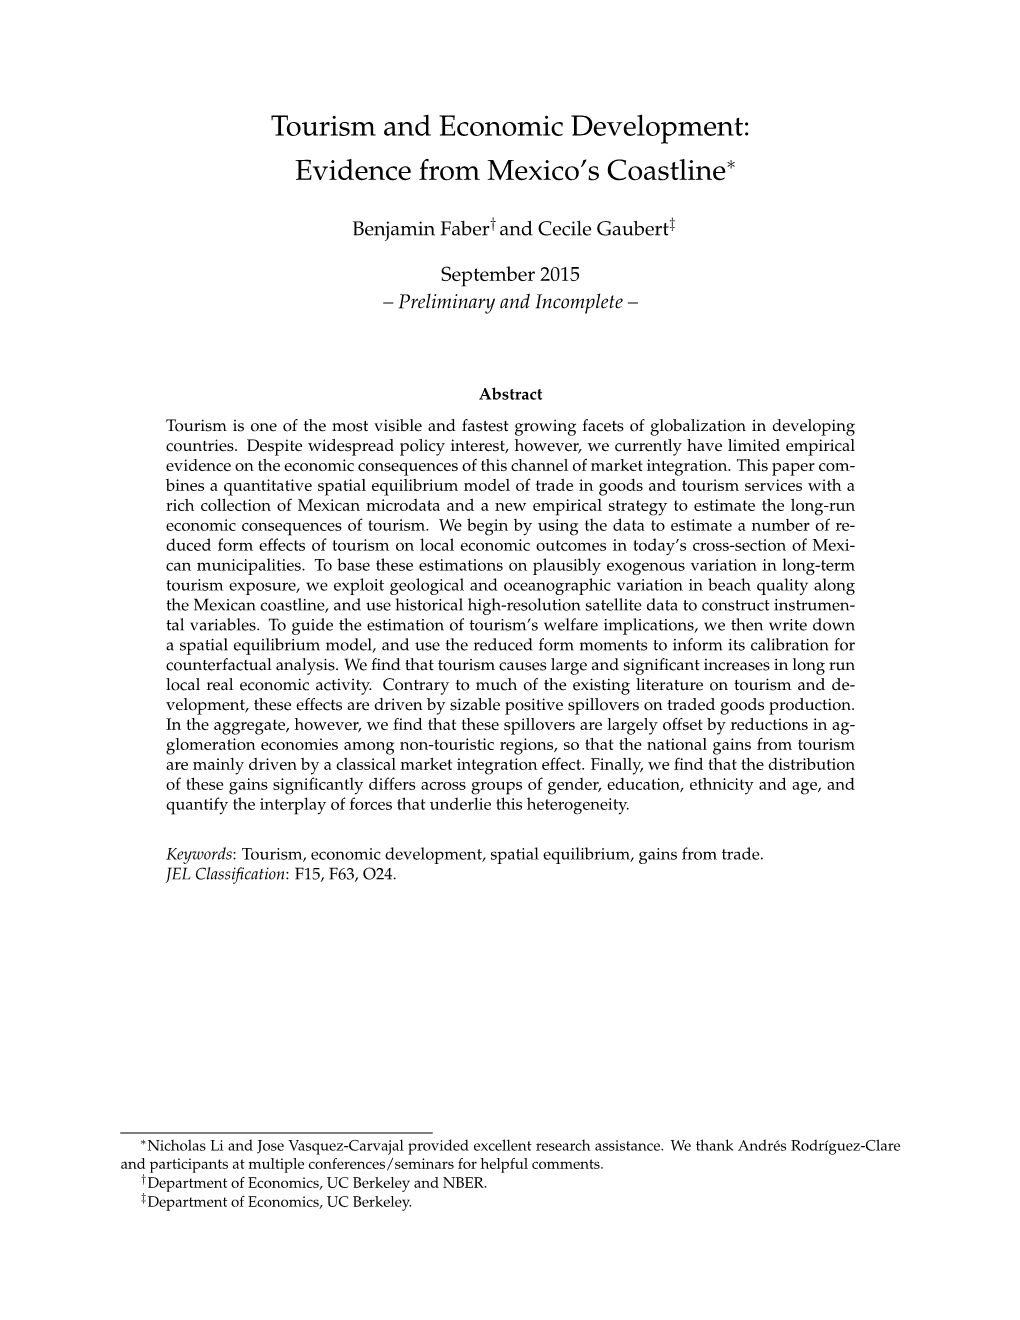 Tourism and Economic Development: Evidence from Mexico's